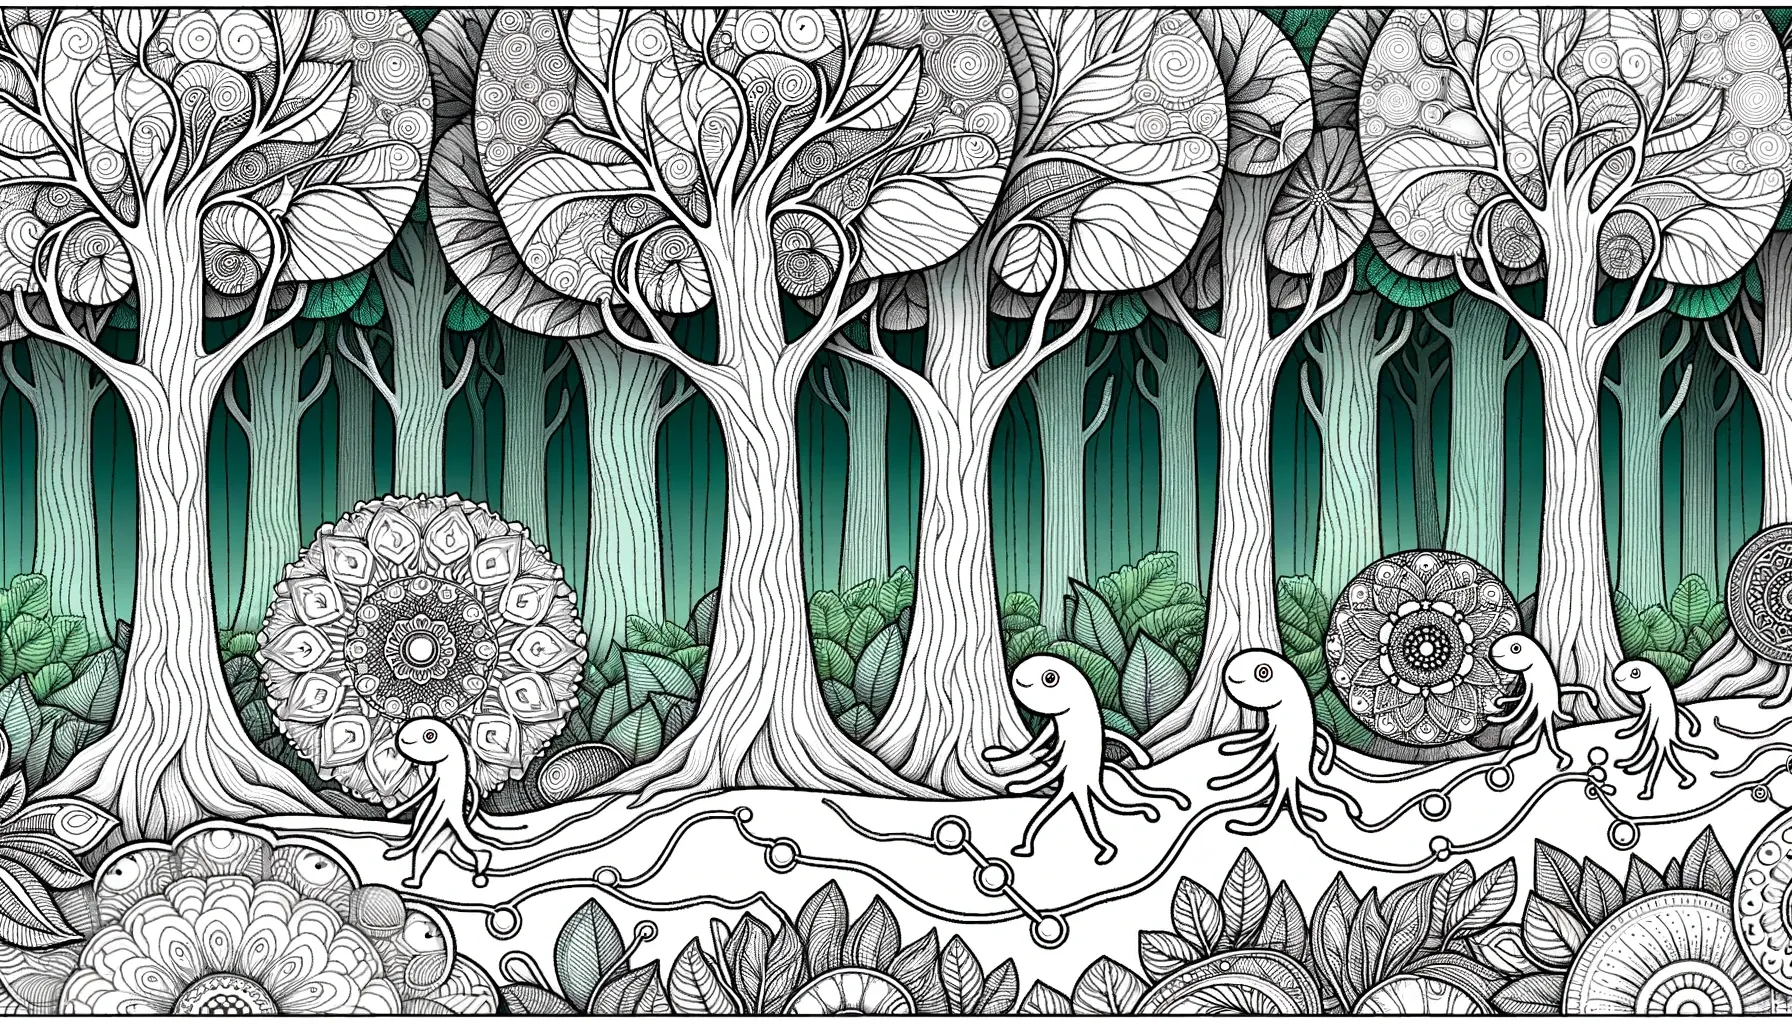 Wide illustration: A serene forest where trees have leaves shaped like coloring patterns and mandalas. Neurons wander around, coloring the scenery, while neurotransmitter creatures like Serotonin and GABA guide them, showcasing the harmony between coloring and brain health.